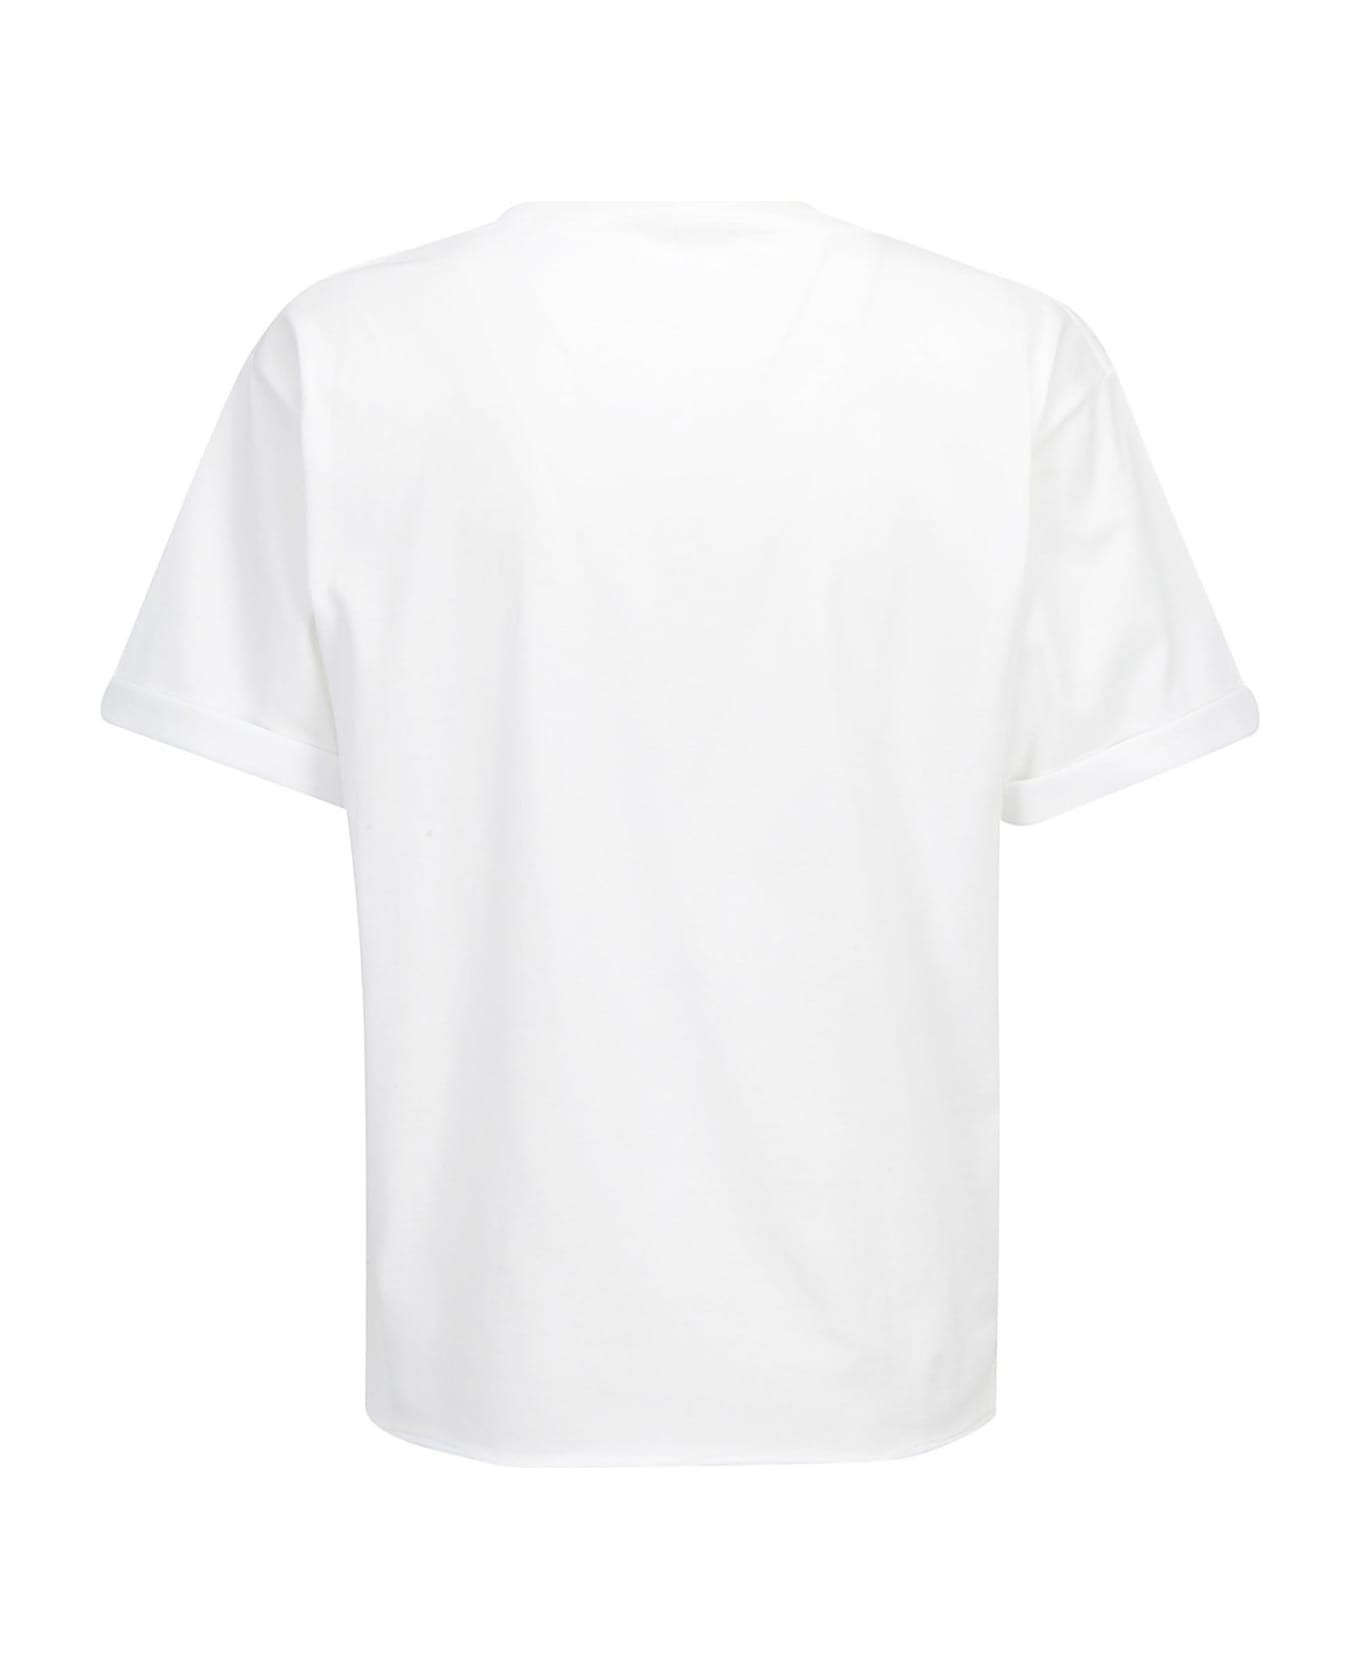 Saint Laurent Cotton T-shirt With Frontal Iconic Print - White Tシャツ